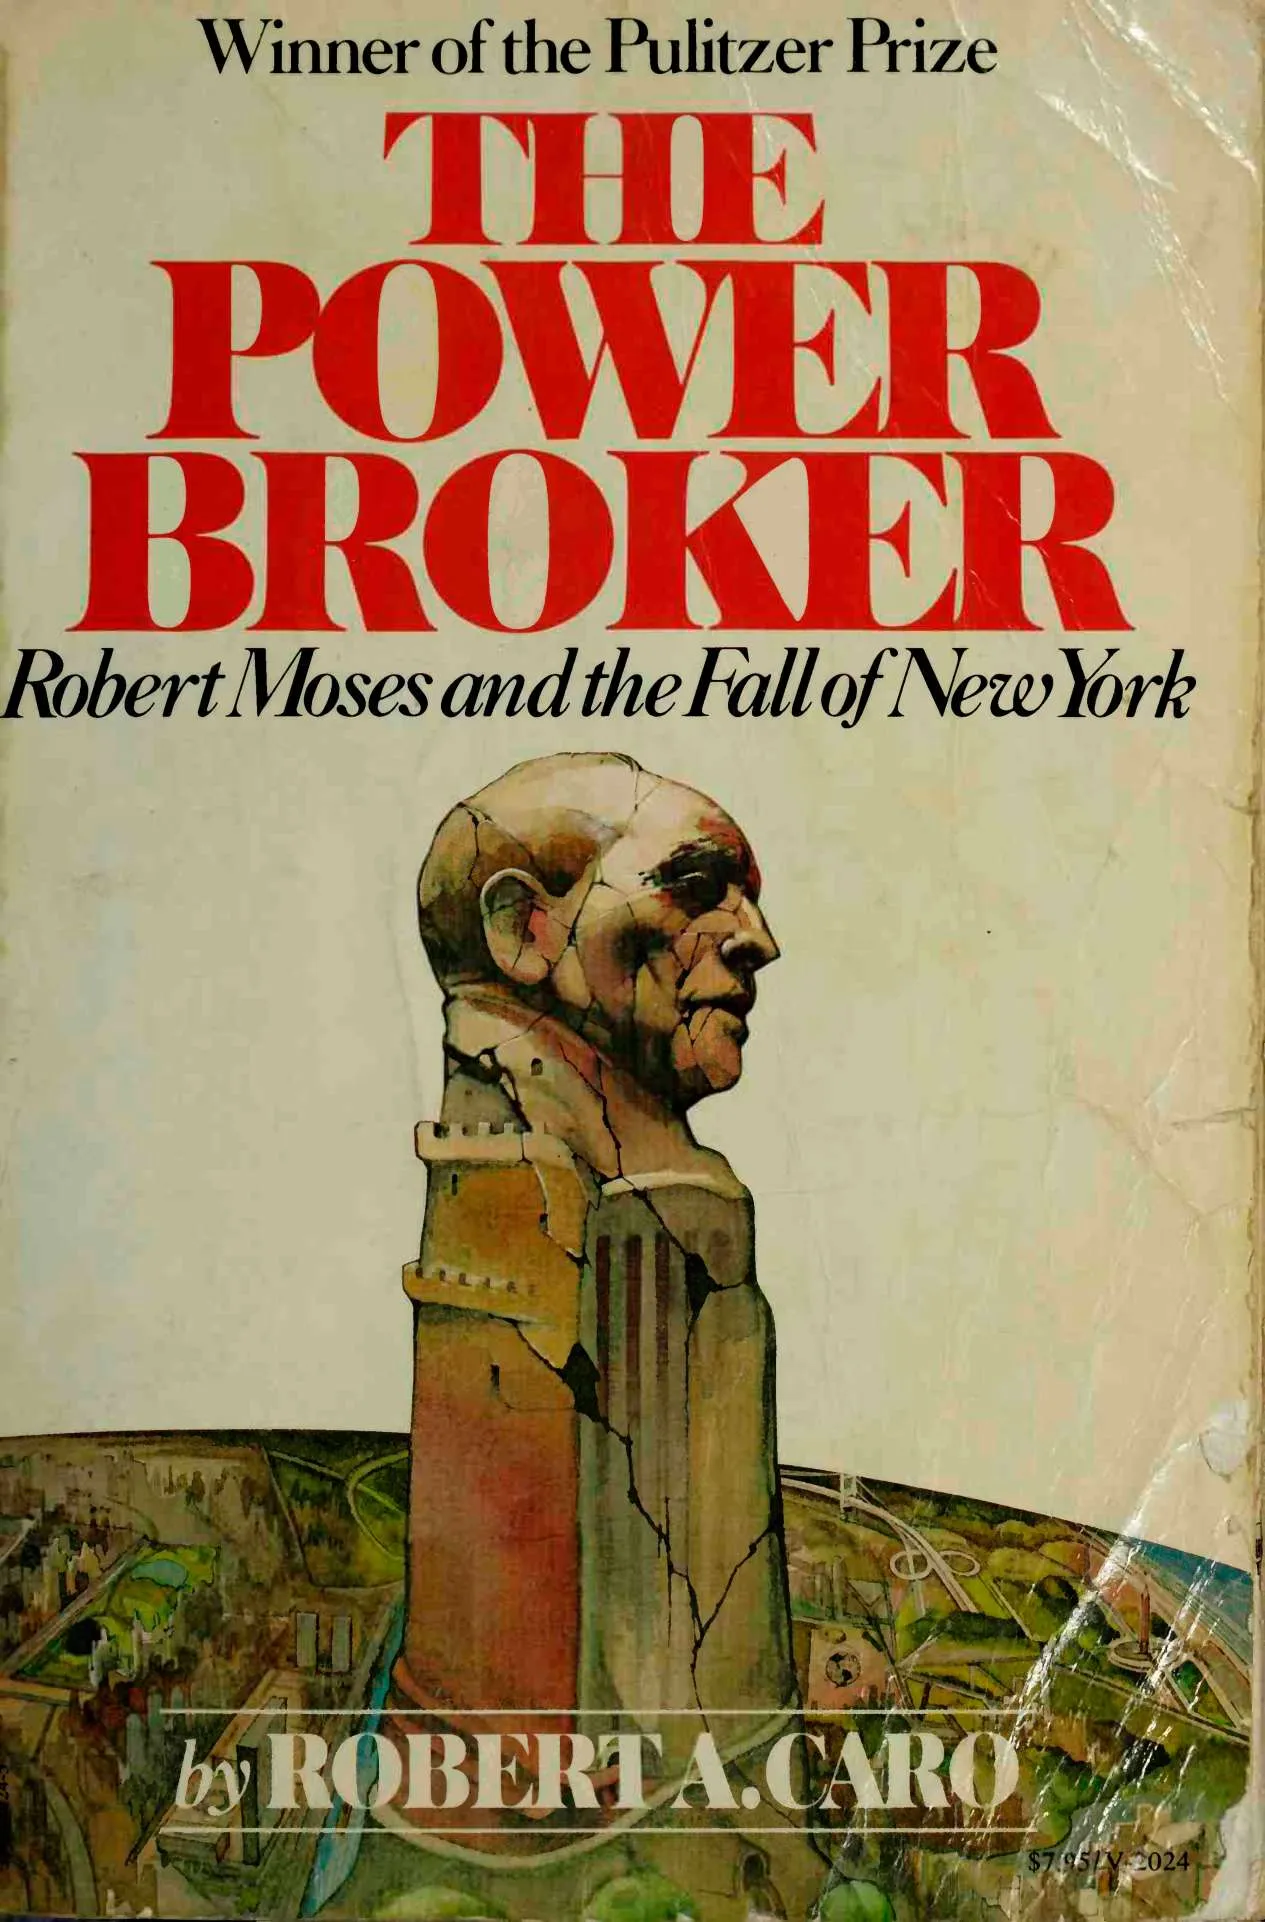 Cover of the book title The Power Broker